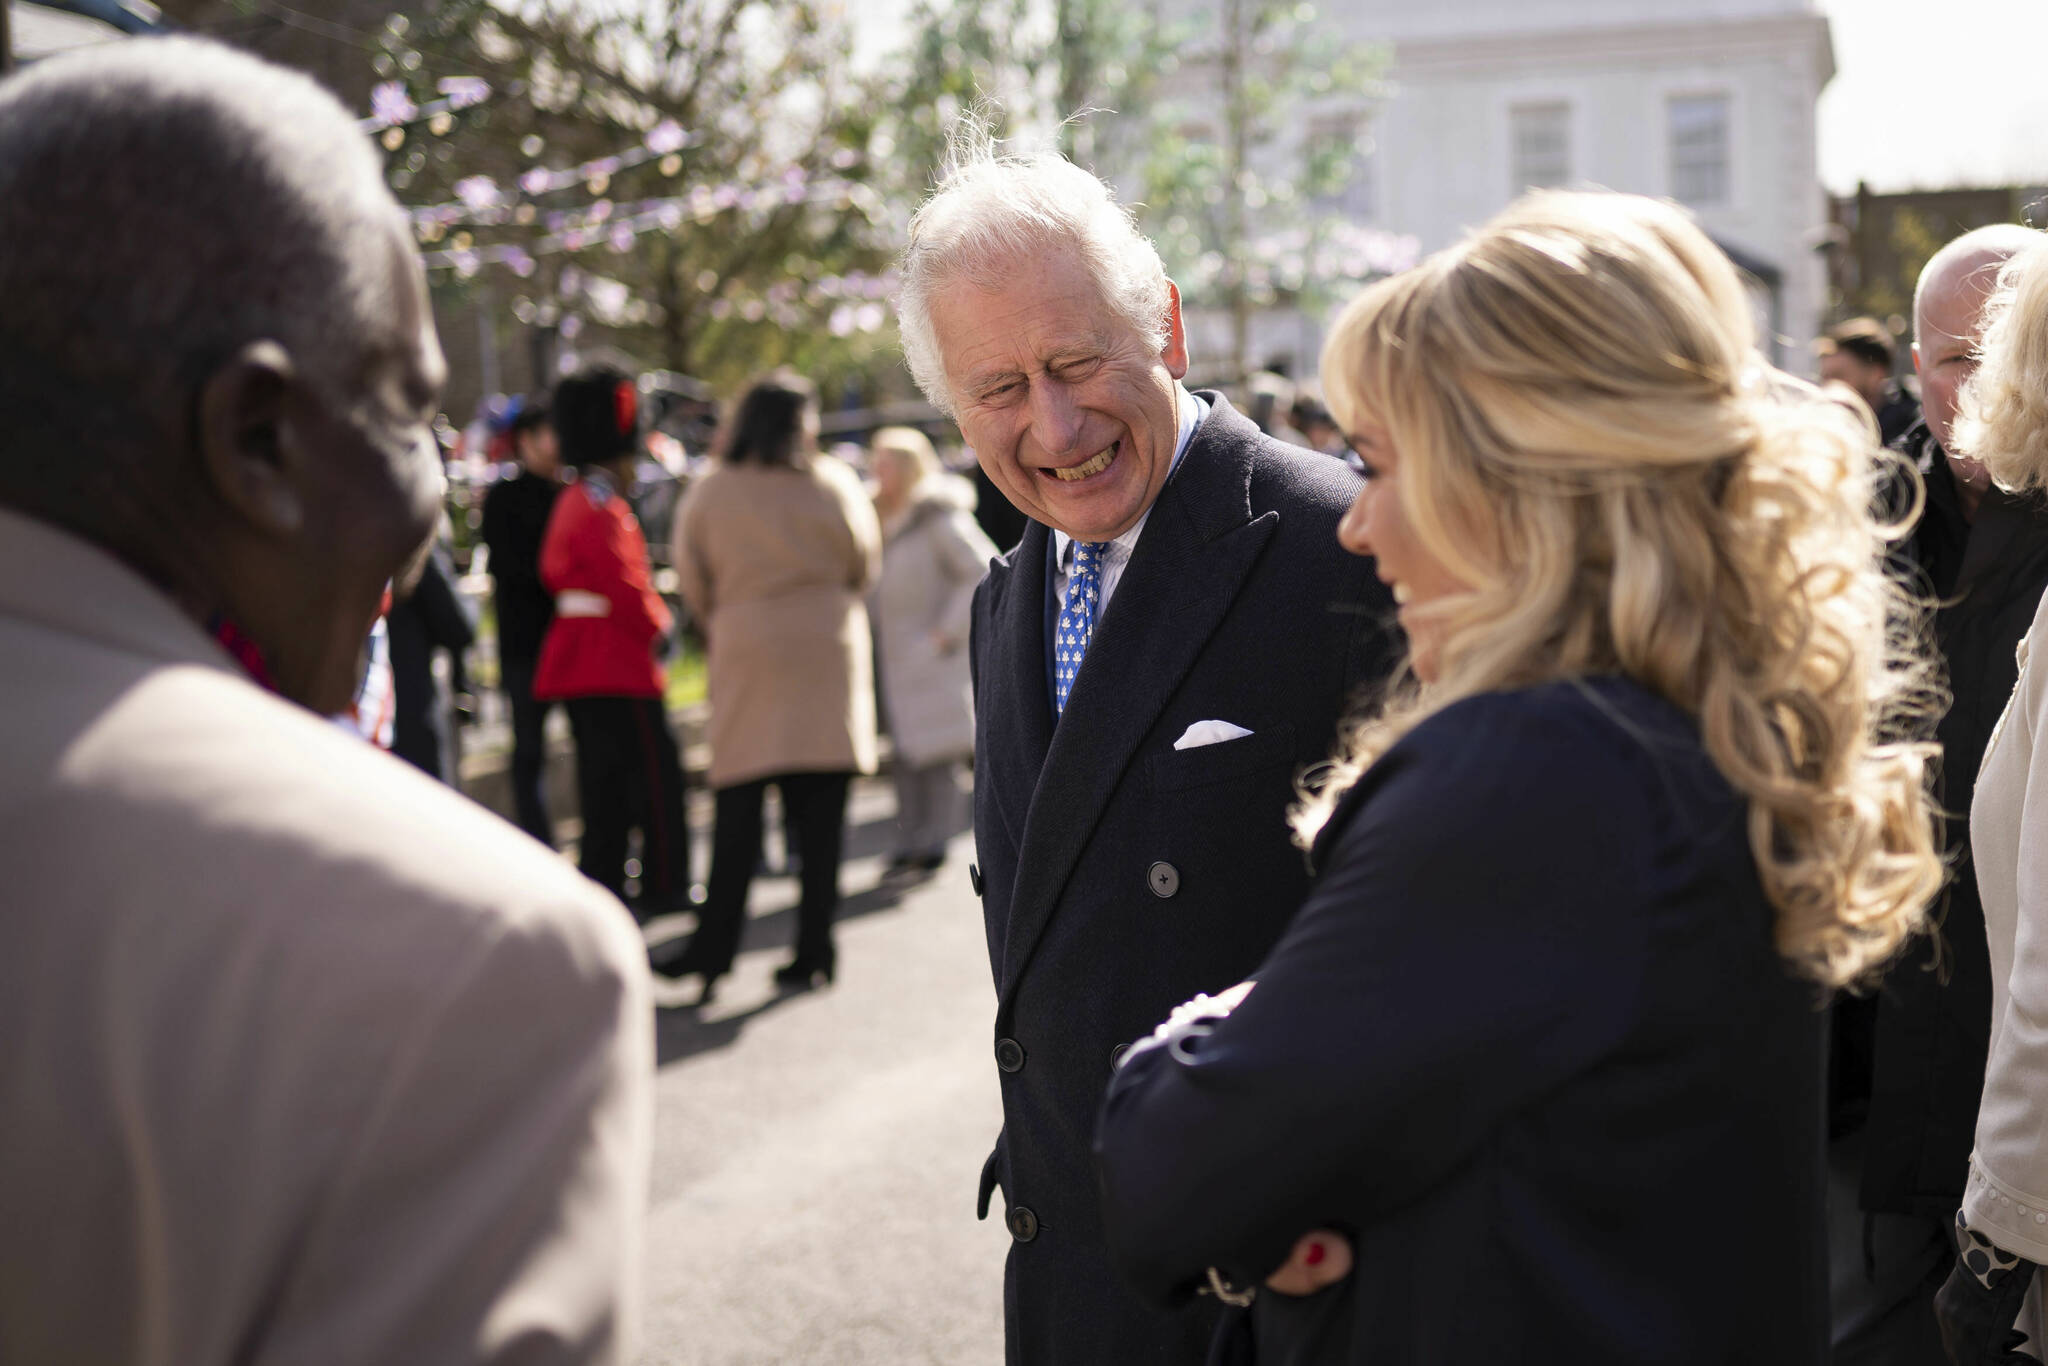 Britain’s Prince Charles, centre, reacts with Letitia Dean, as he and Camilla, the Duchess of Cornwall visit the set of EastEnders at the BBC studios in Elstree, Hertfordshire, England, Thursday March 31, 2022. (Aaron Chown/Pool Photo via AP)